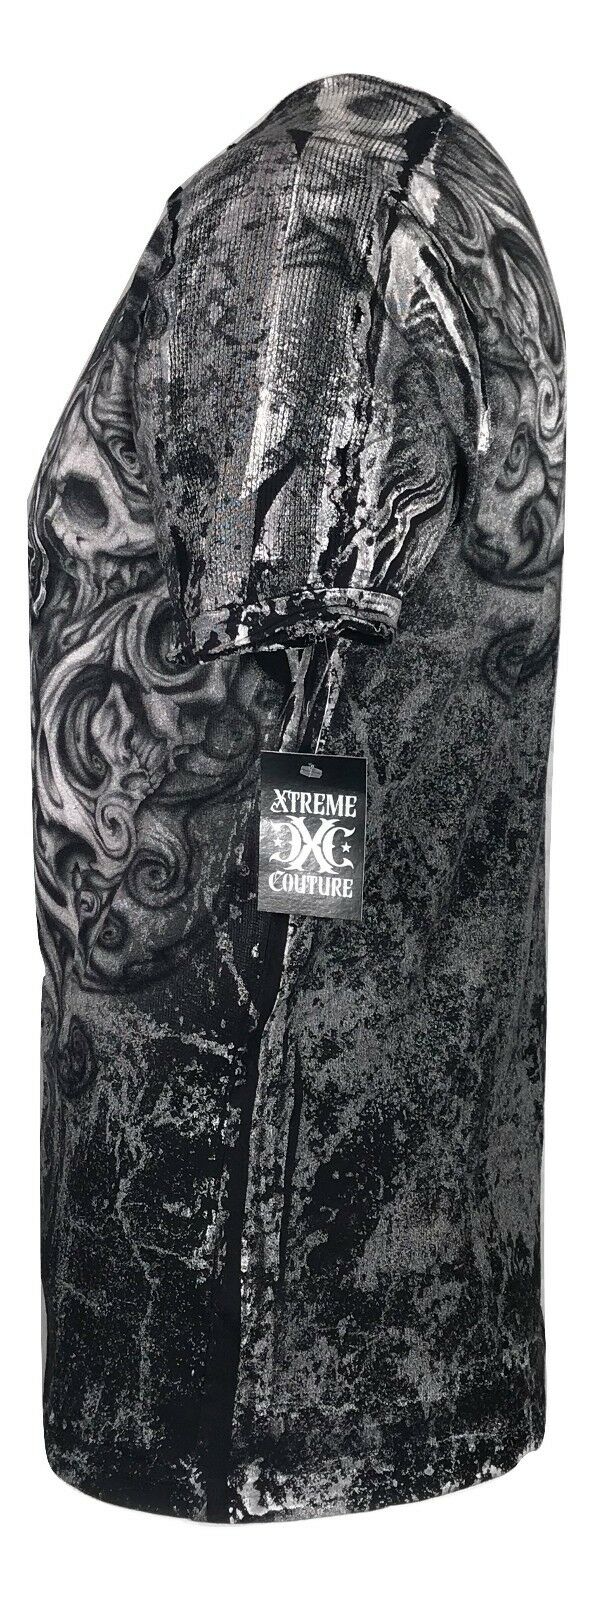 XTREME COUTURE by AFFLICTION Men T-Shirt HADES Skulls Tatto Biker MMA GYM